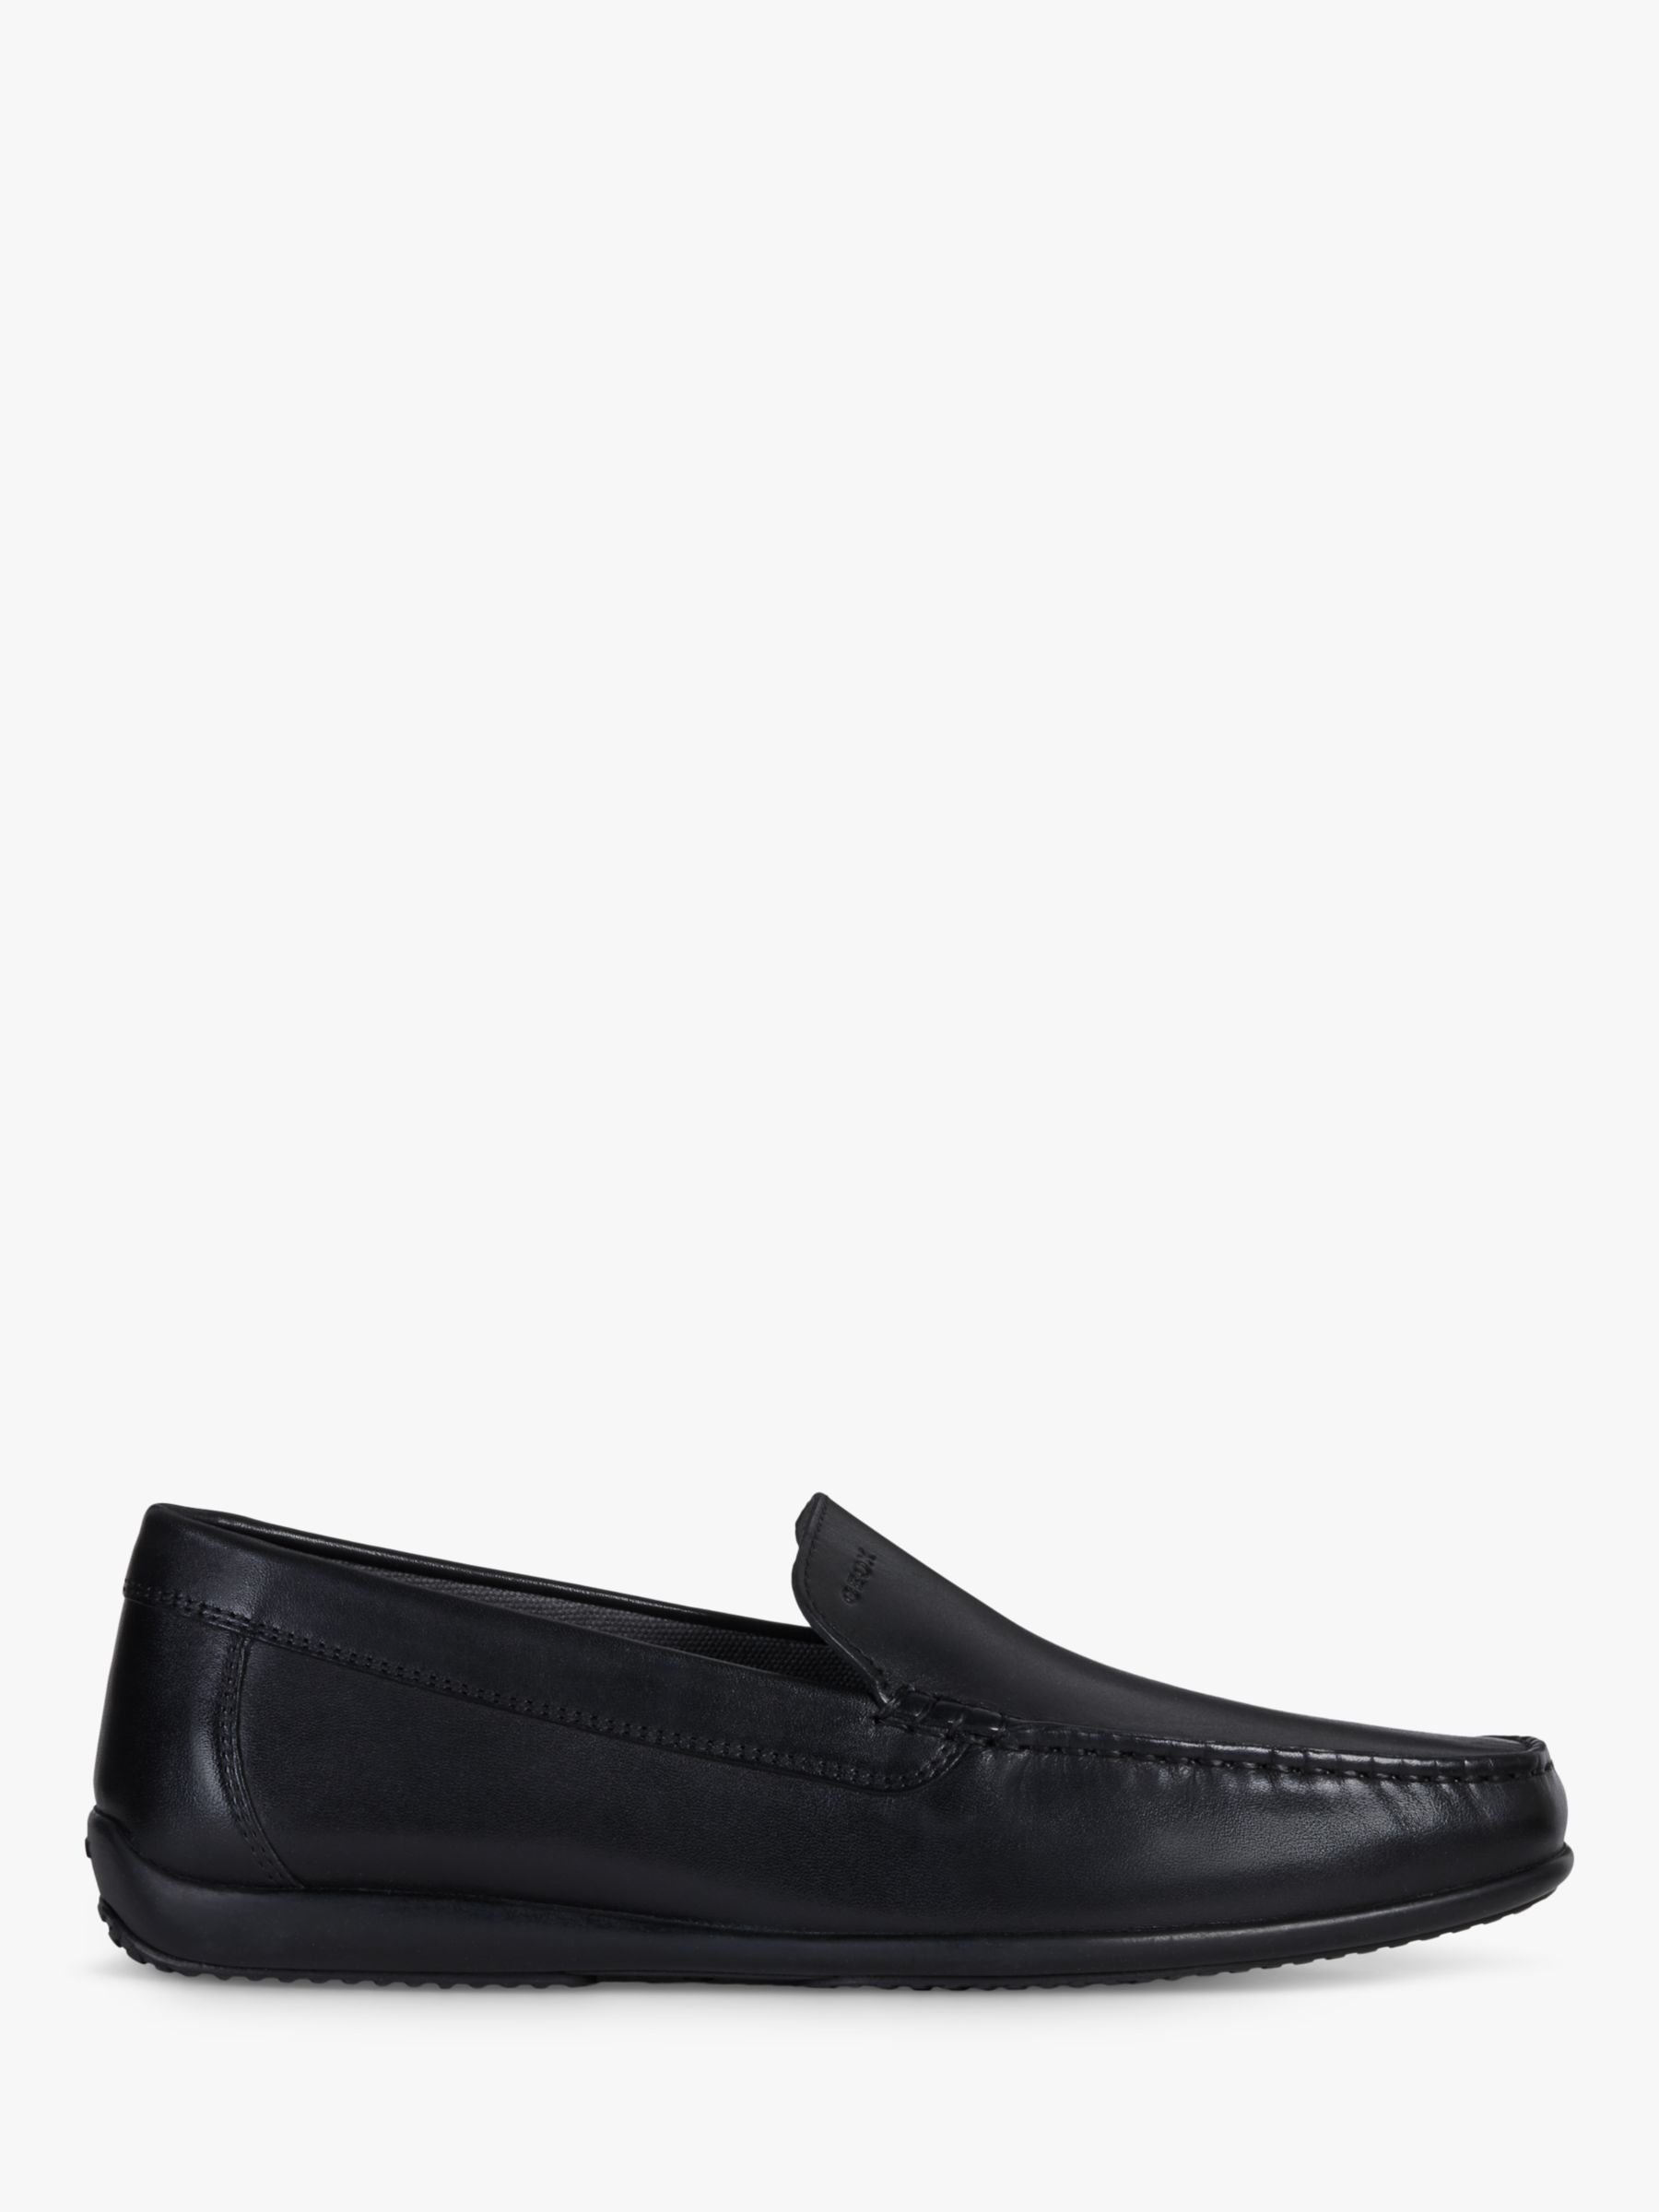 Geox Ascanio Leather Loafers, Black at John Lewis & Partners